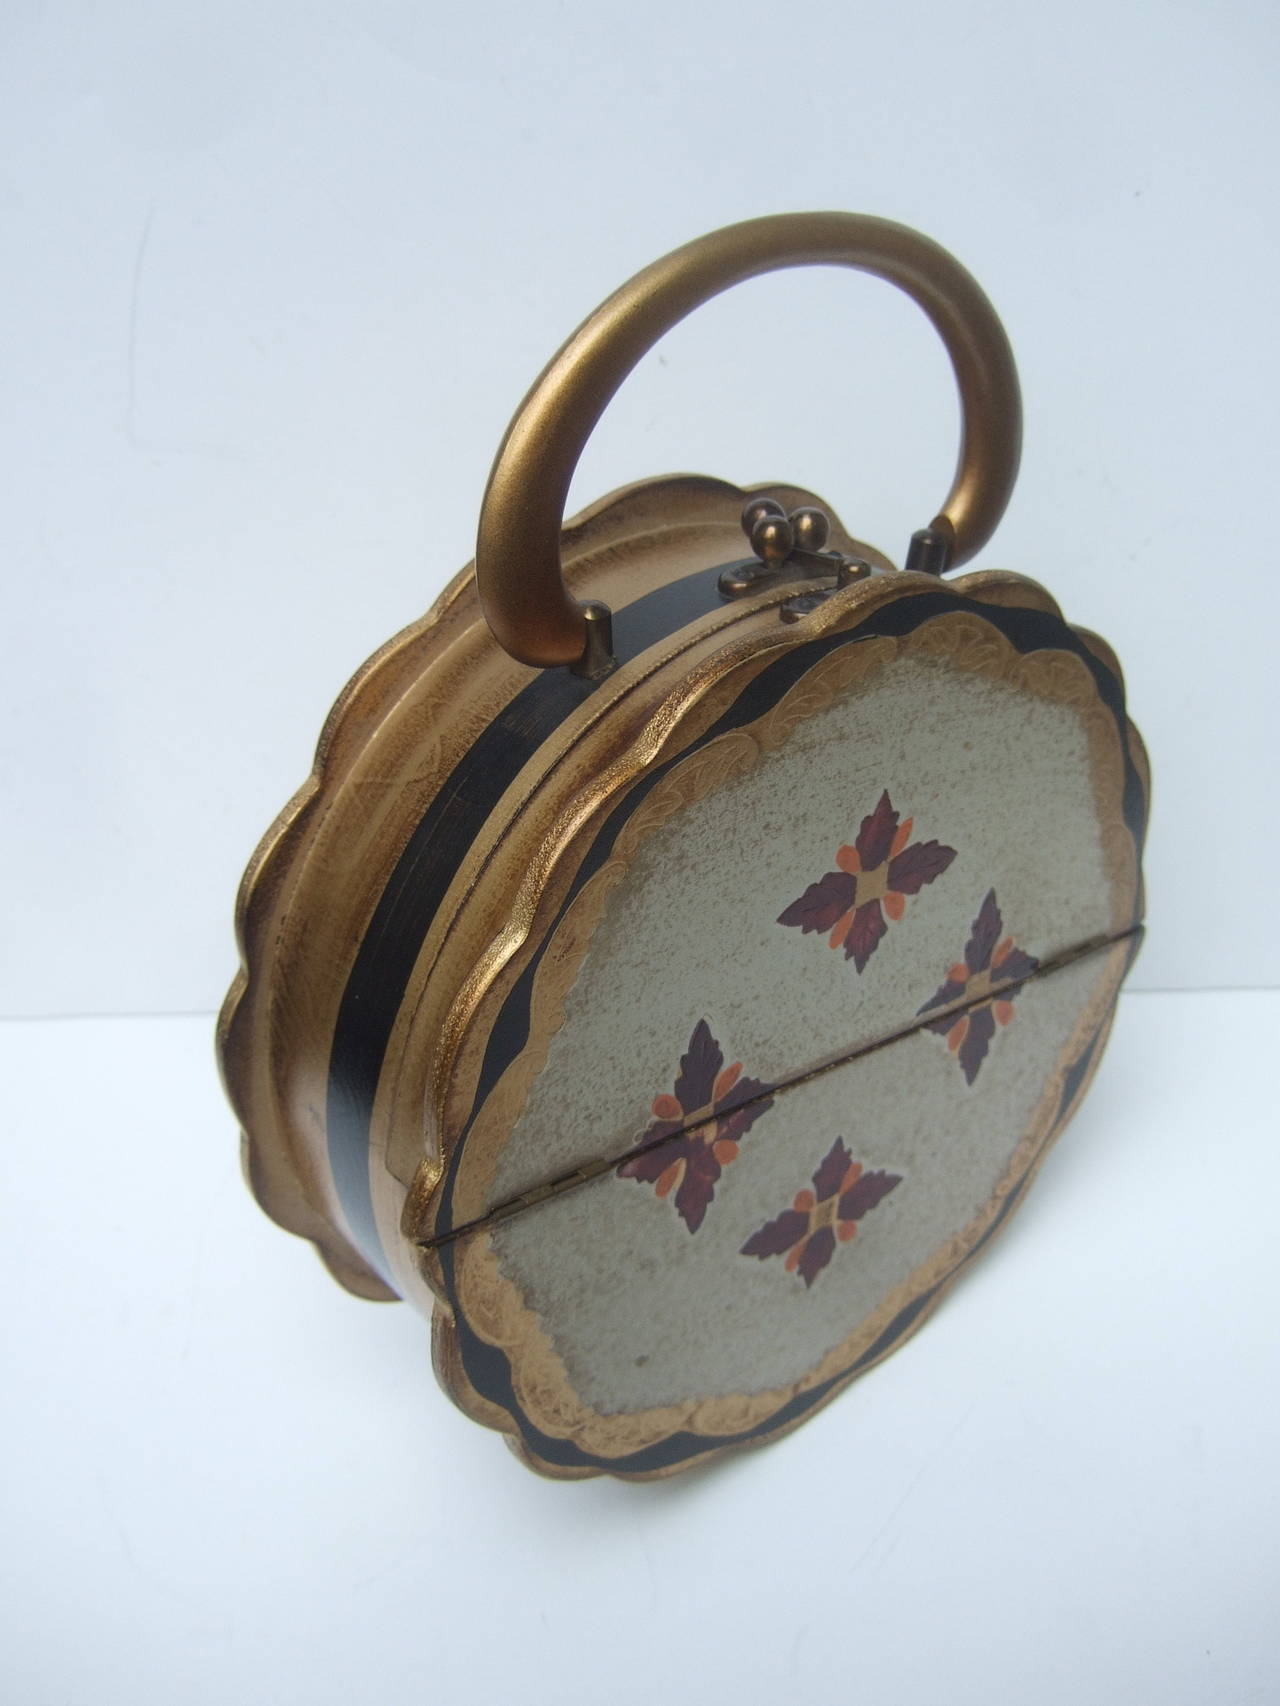 Unique Florentine style wood circular box style handbag c 1960s
The vintage round wood handbag is accented with gilt
enamel trim with burgundy & burnt orange painted
medallions on the front exterior panel

The wood border edges have a scalloped